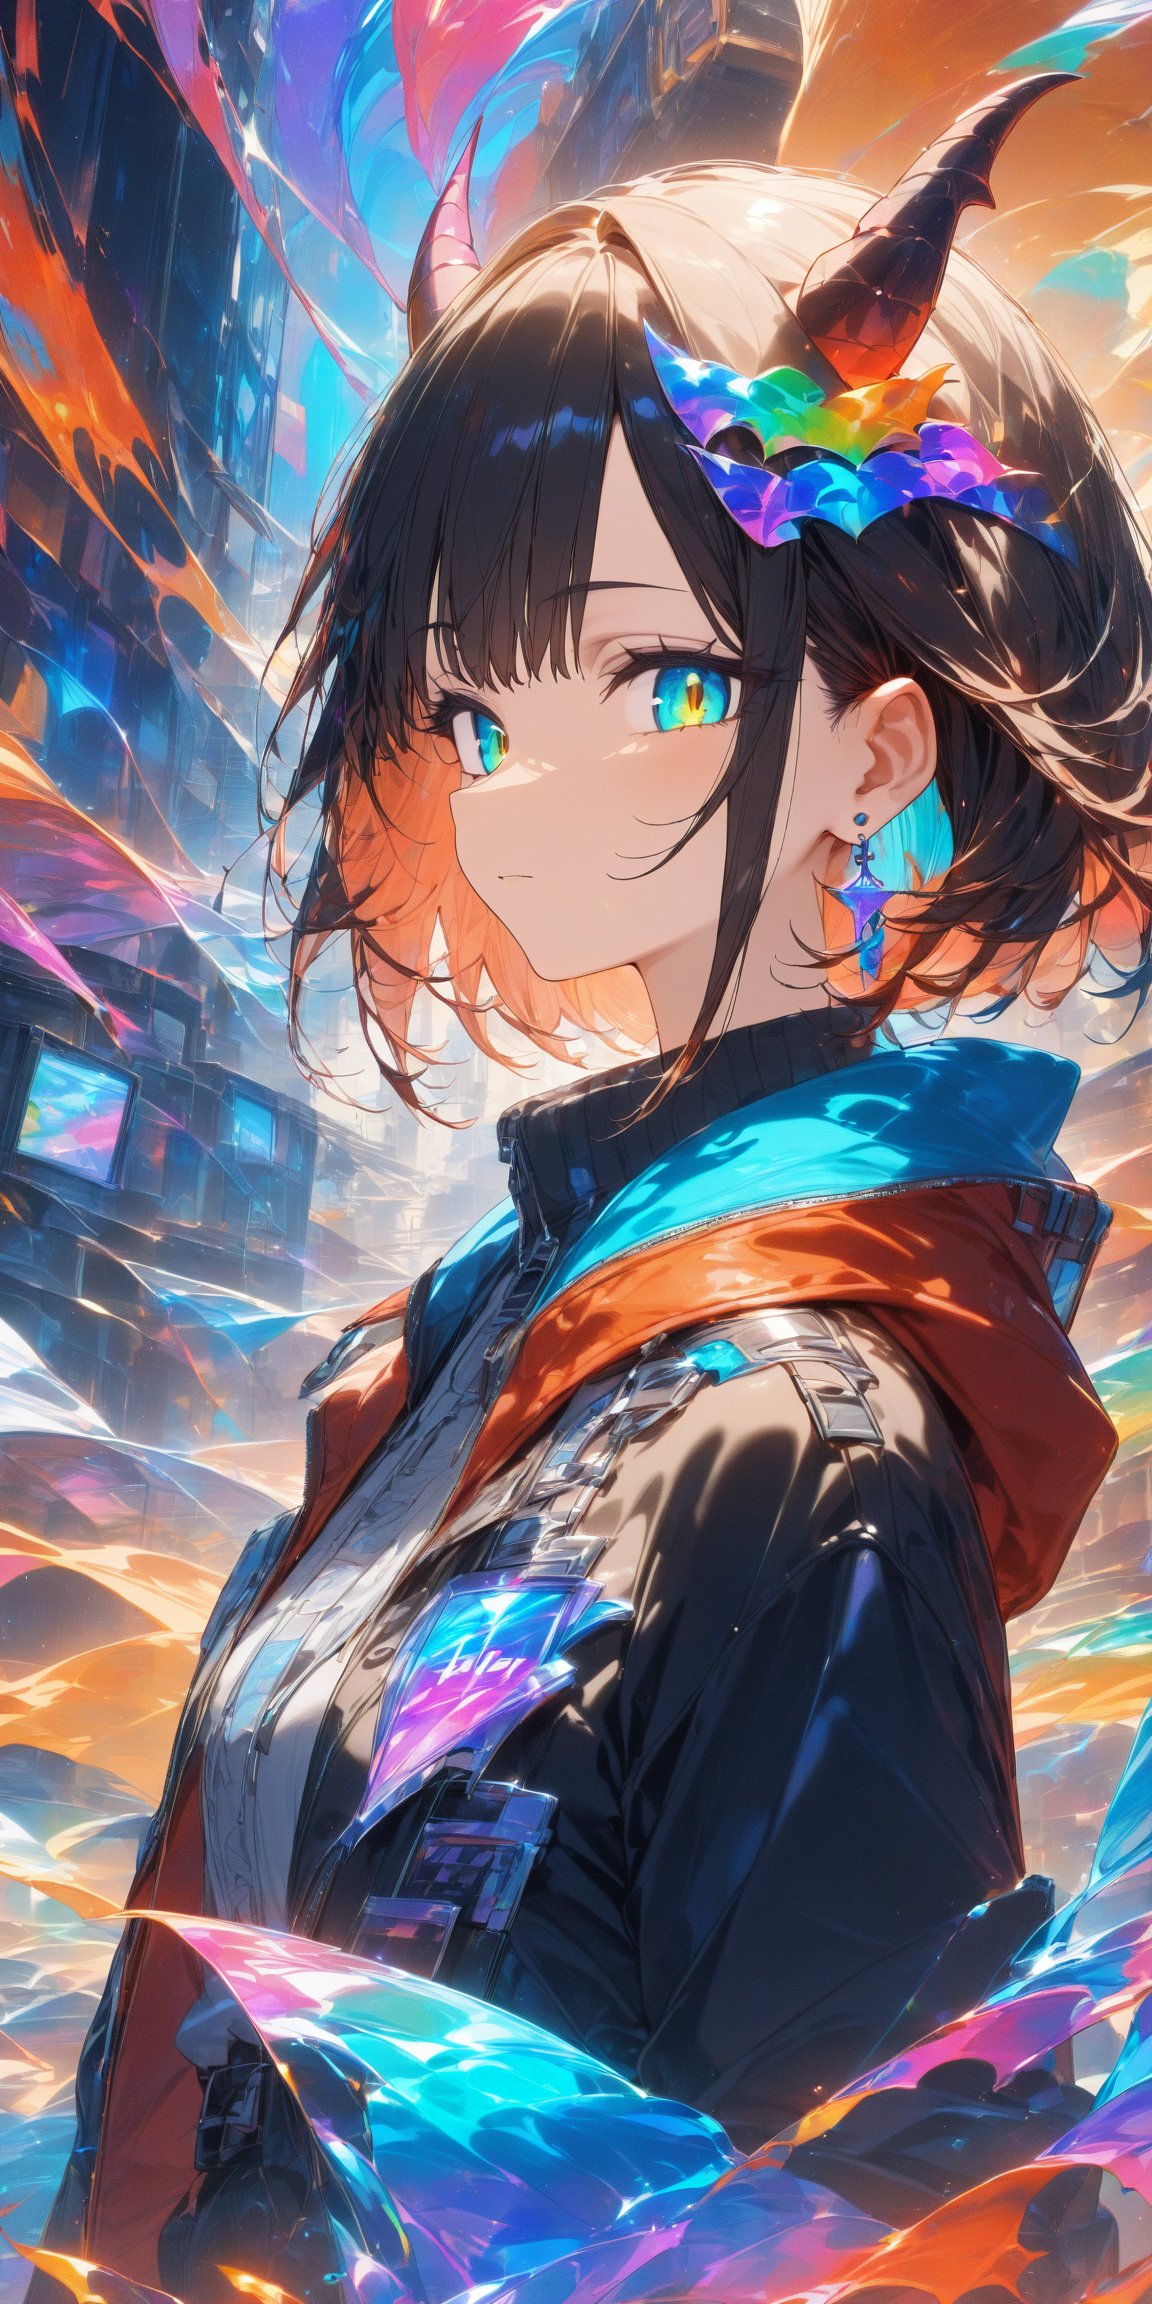 SCORE_9, SCORE_8_UP, SCORE_7_UP, SCORE_6_UP,

MASTERPIECE, BEST QUALITY, HIGH QUALITY, 
HIGHRES, ABSURDRES, PERFECT COMPOSITION,
INTRICATE DETAILS, ULTRA-DETAILED,
PERFECT FACE, PERFECT EYES,
NEWEST, 

rating:safe, 1girl, solo, horns, short_hair, jacket, blue_eyes, black_jacket, bangs, closed_mouth, looking_at_viewer, black_hair, chromatic_aberration, upper_body, expressionless, shirt, jewelry, from_side, earrings, looking_to_the_side, eyebrows_visible_through_hair, ear_piercing, demon_horns, colorful, glitch effect,